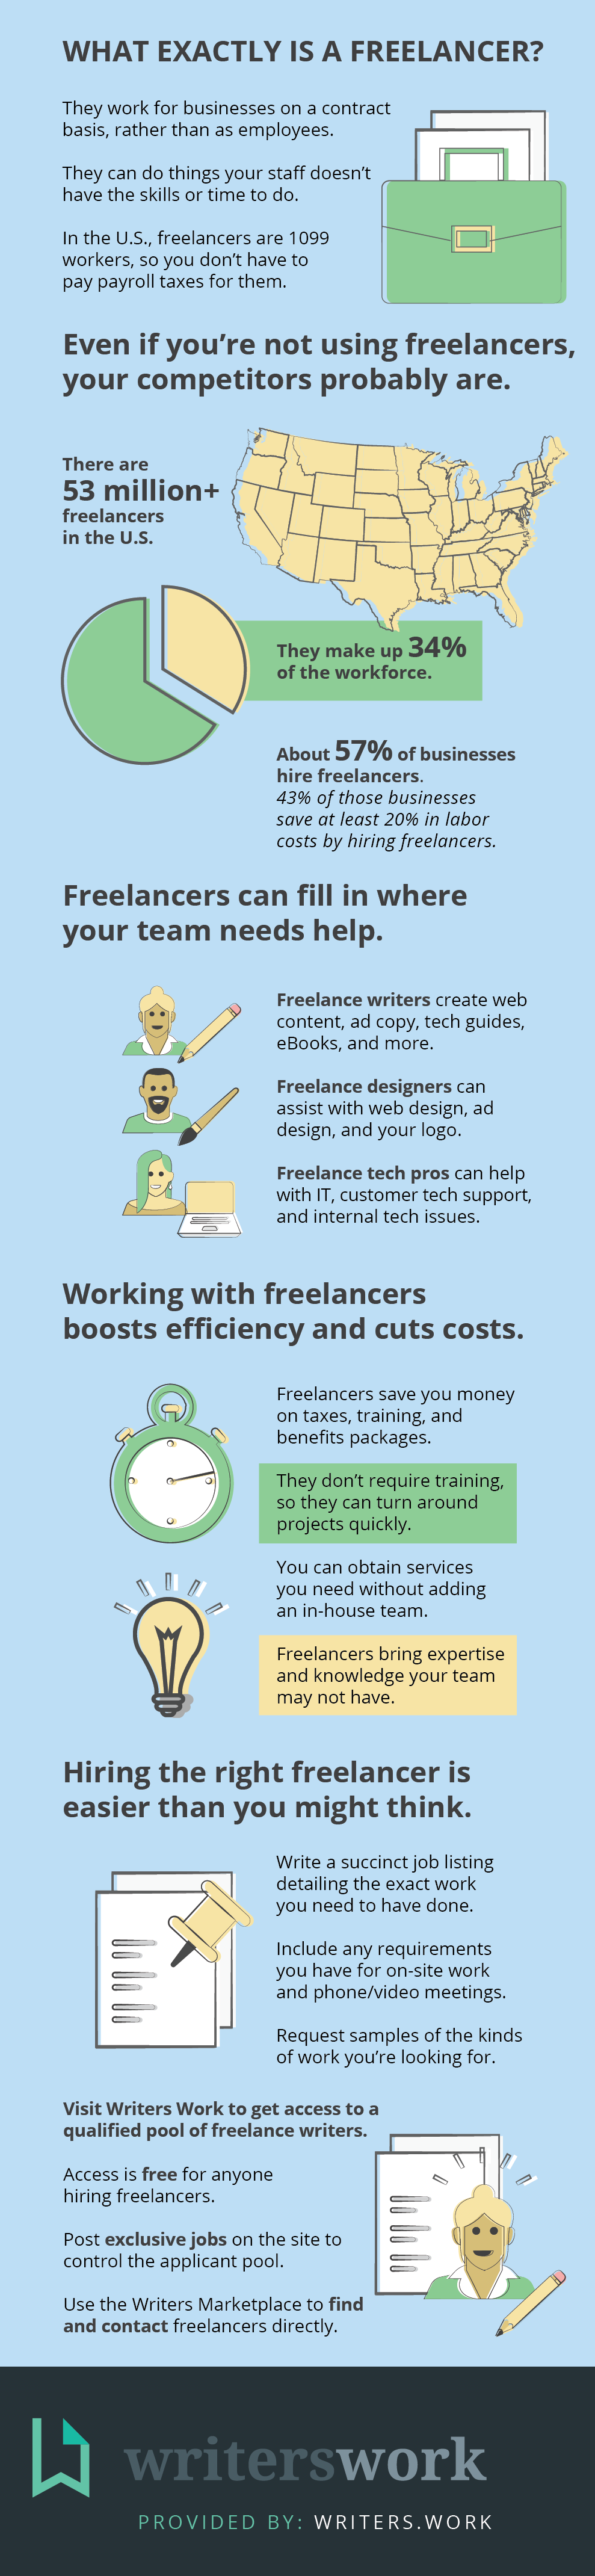 Infographic about how hiring a freelancer can help a small business.